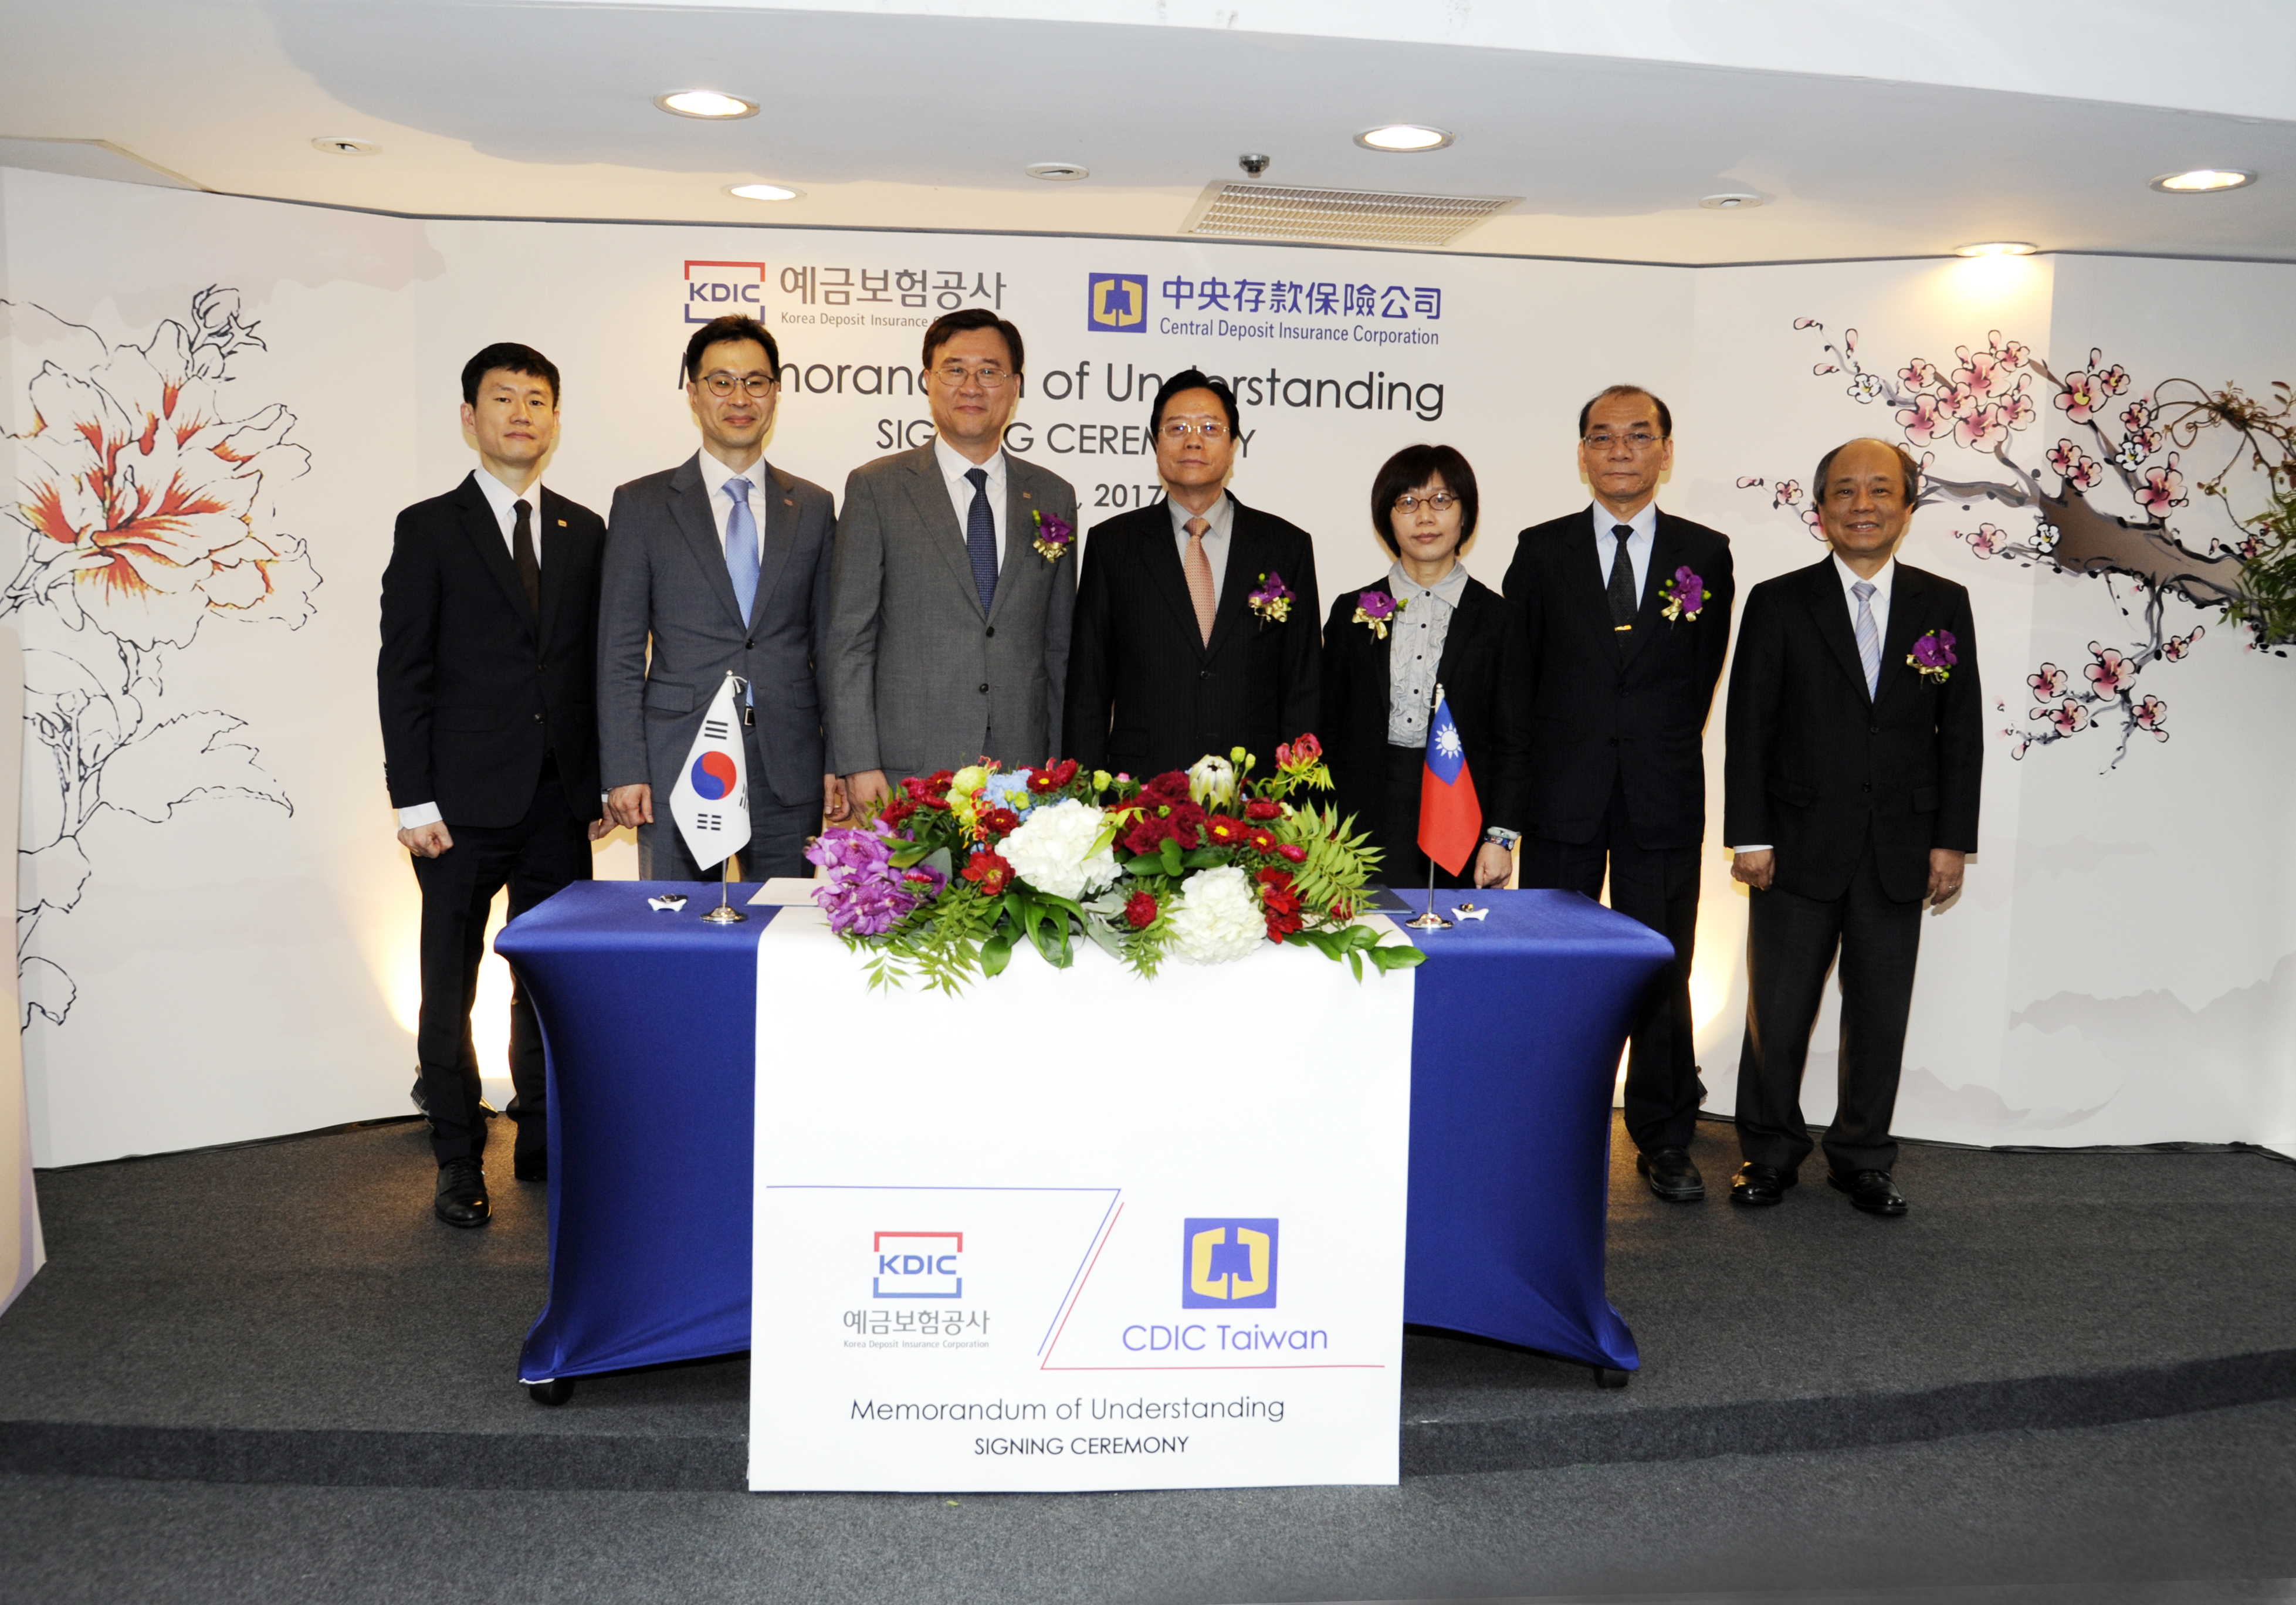 Group photo of Chief Secretary of Banking Bureau of FSC Ms. Yen-Yi Chen (3rd from the right), Auditor of Department of Financial Inspection of the Central Bank Mr. Teng-Chang Wu (2nd from the right), CDIC Chairman Dr. Paul C.D. Lei (4th from the right), CDIC President Mr. Michael M. K. Lin (1st from the right) and KDIC Chairman & President Dr. Bumgook Gwak (3rd from the left) together with other KDIC delegates, Mr. Sungwook Youn (2nd from the left); Mr. Hyunseok Kim (1st from the left).